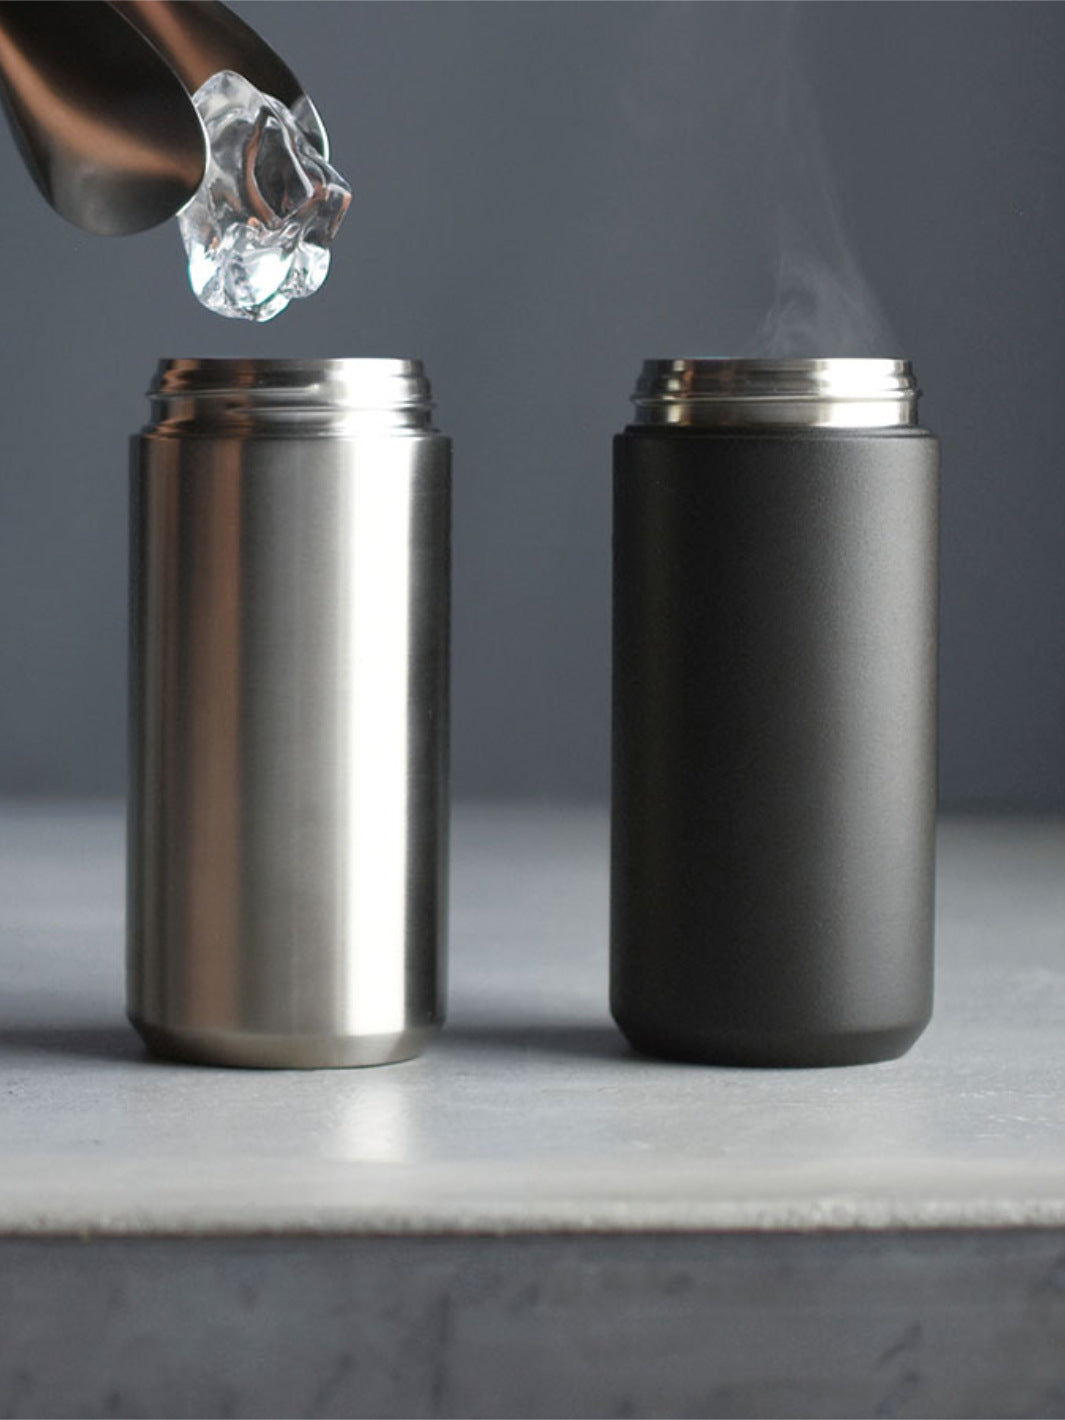 Product Care Guide: Stainless Steel Tumblers – KINTO USA, Inc